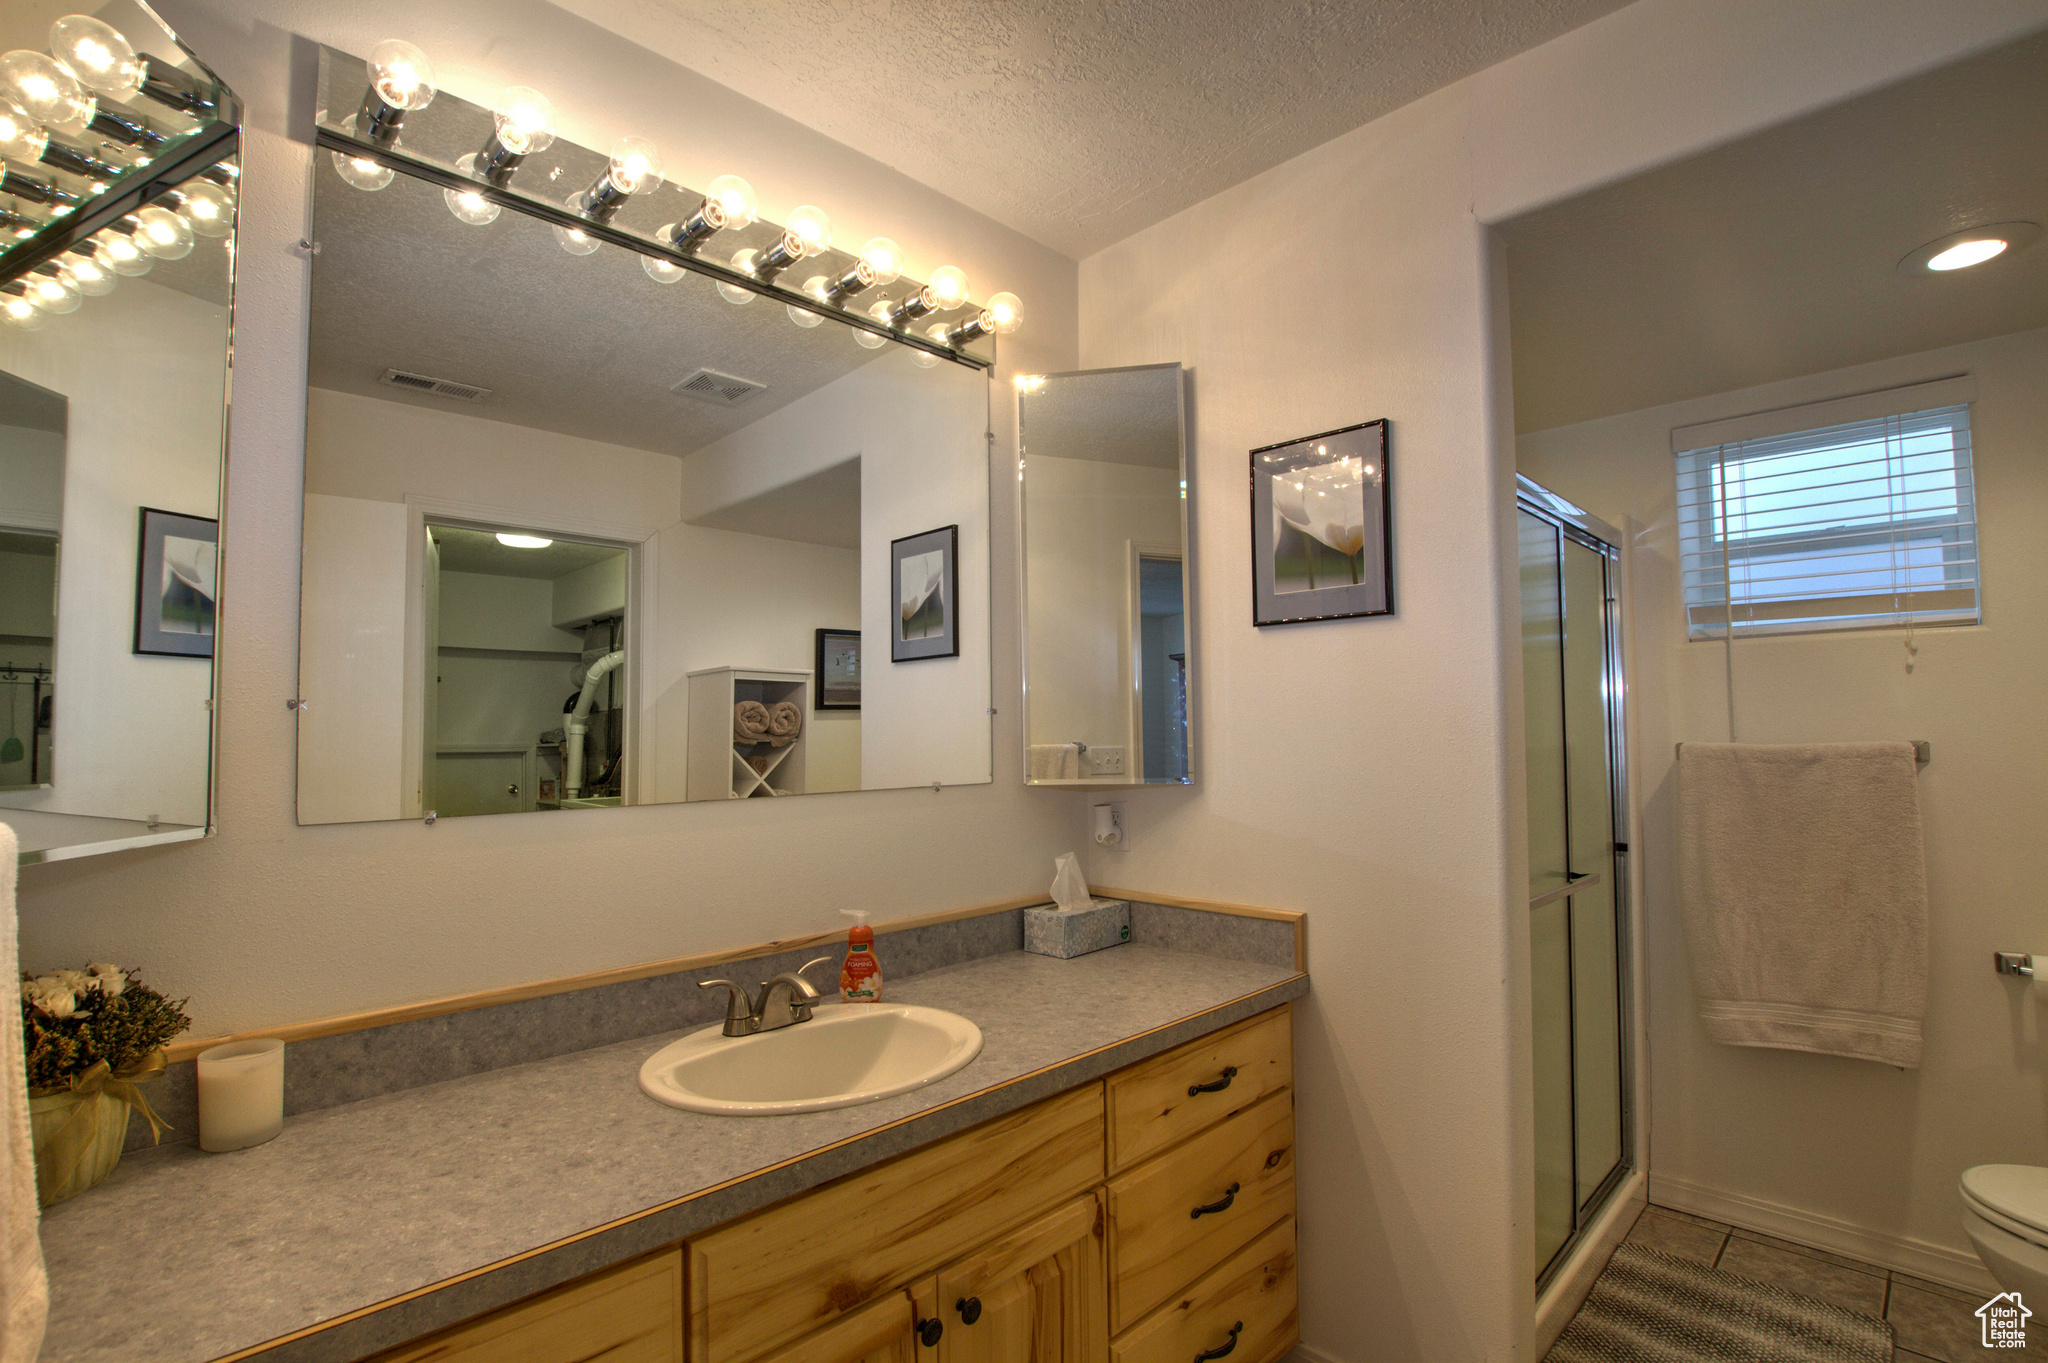 Bathroom featuring vanity, toilet, a textured ceiling, and a shower with shower door